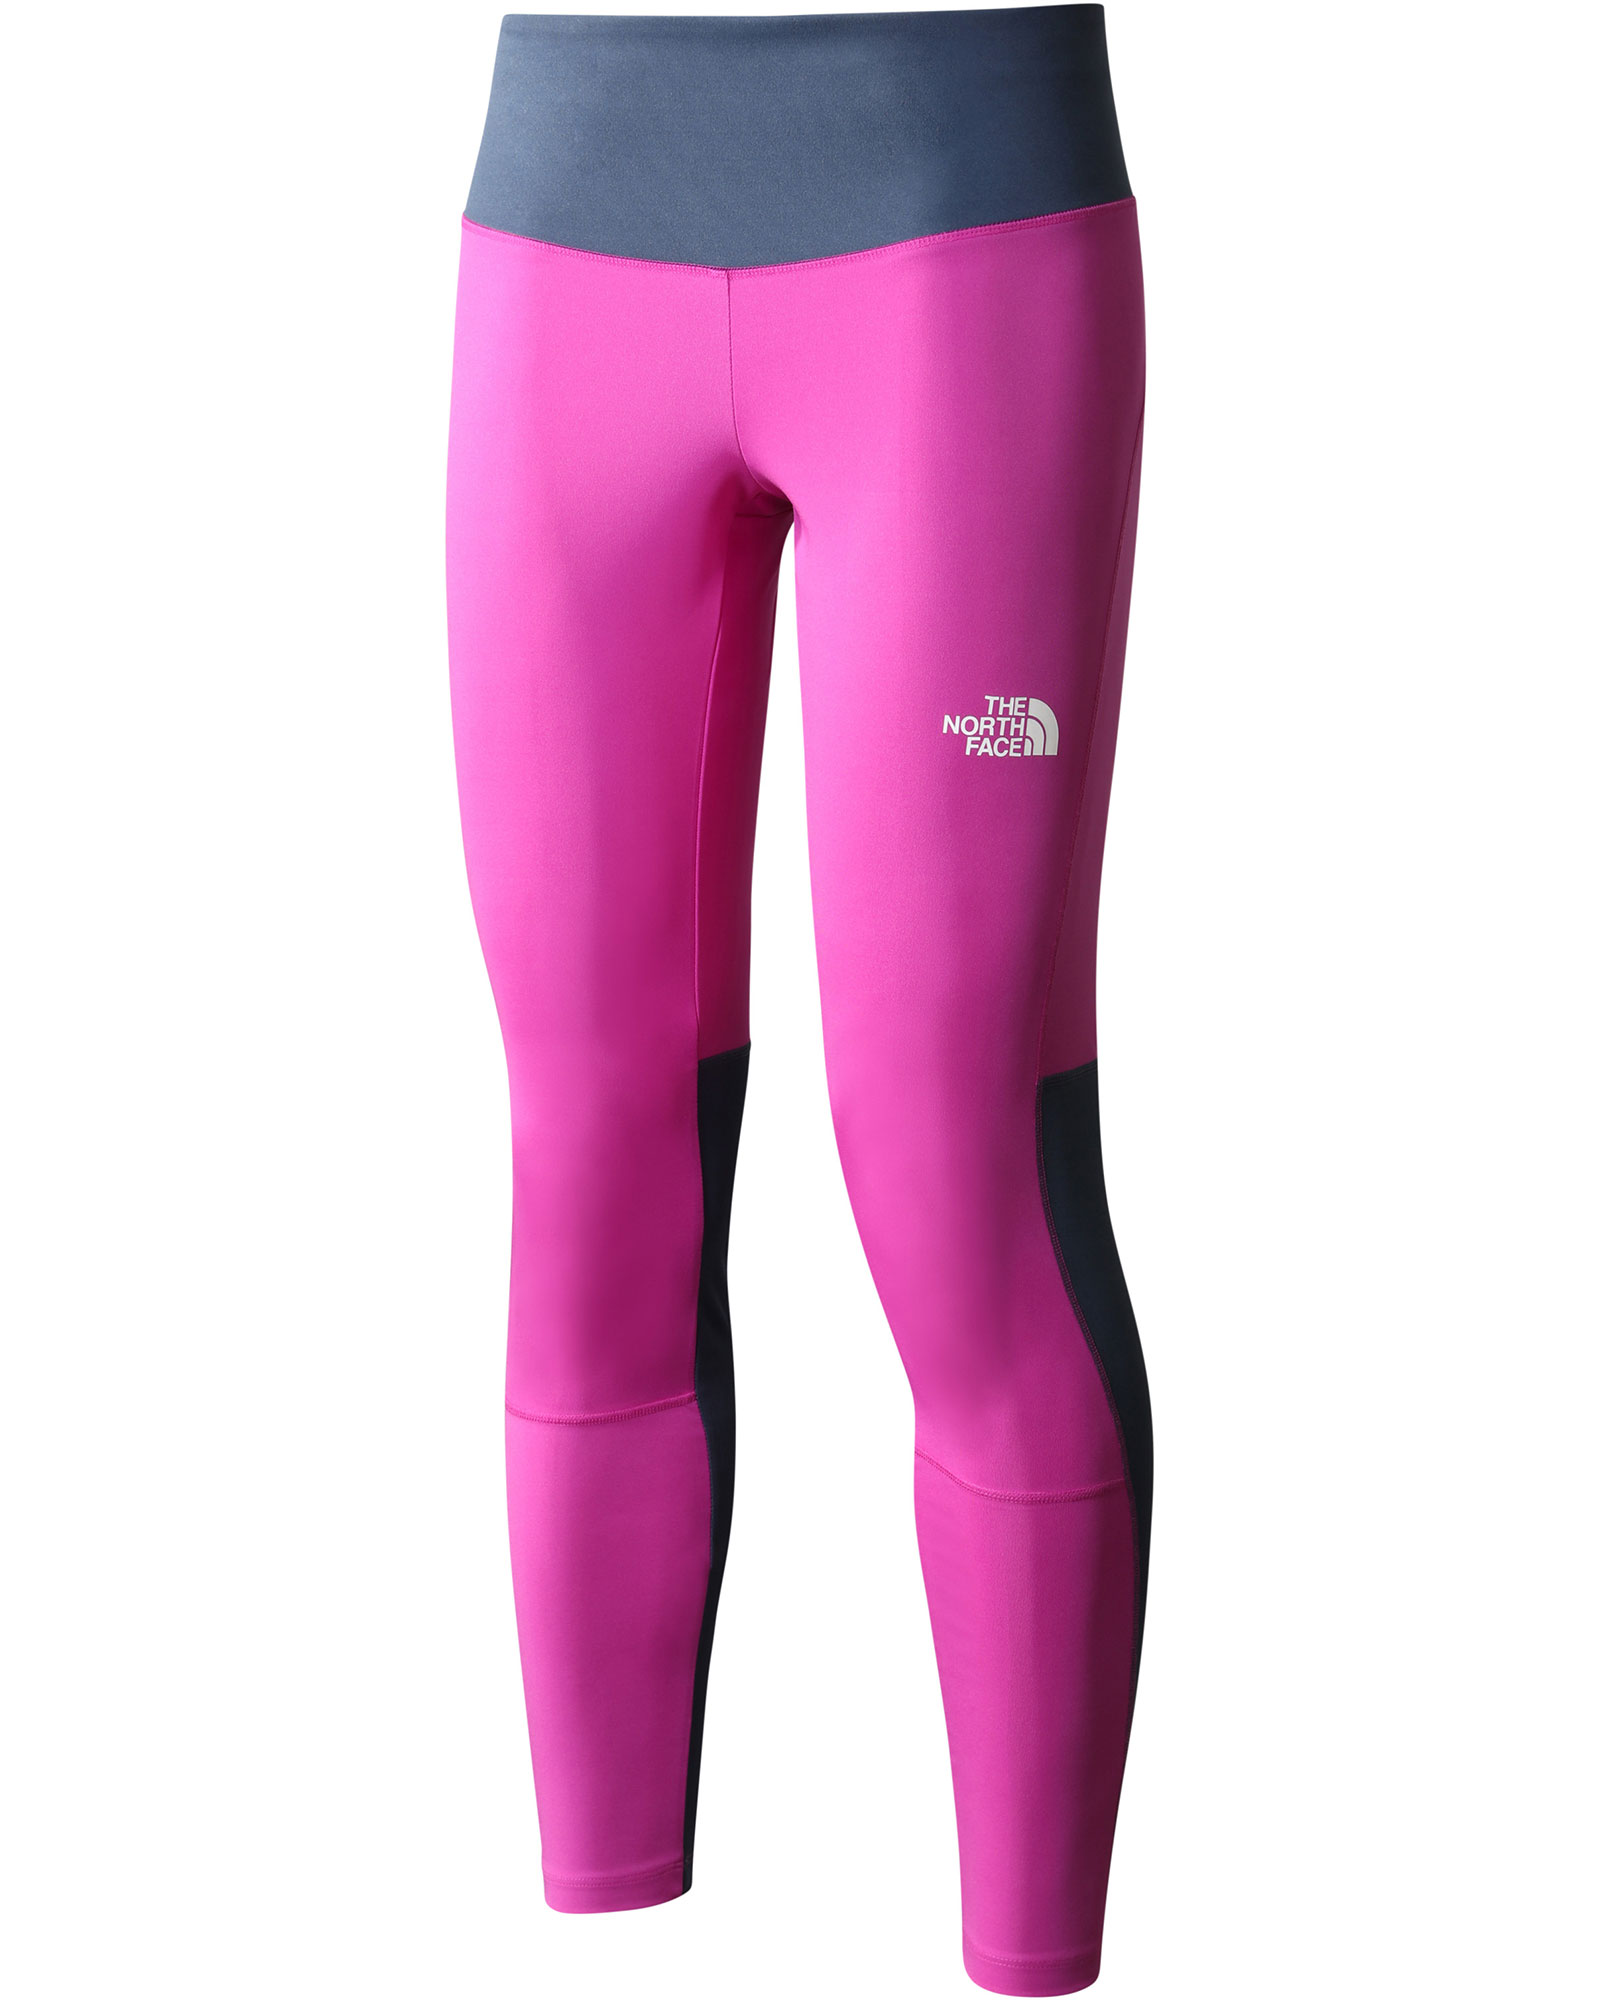 The North Face Women’s MA Tight - Purple Cactus Flow XS